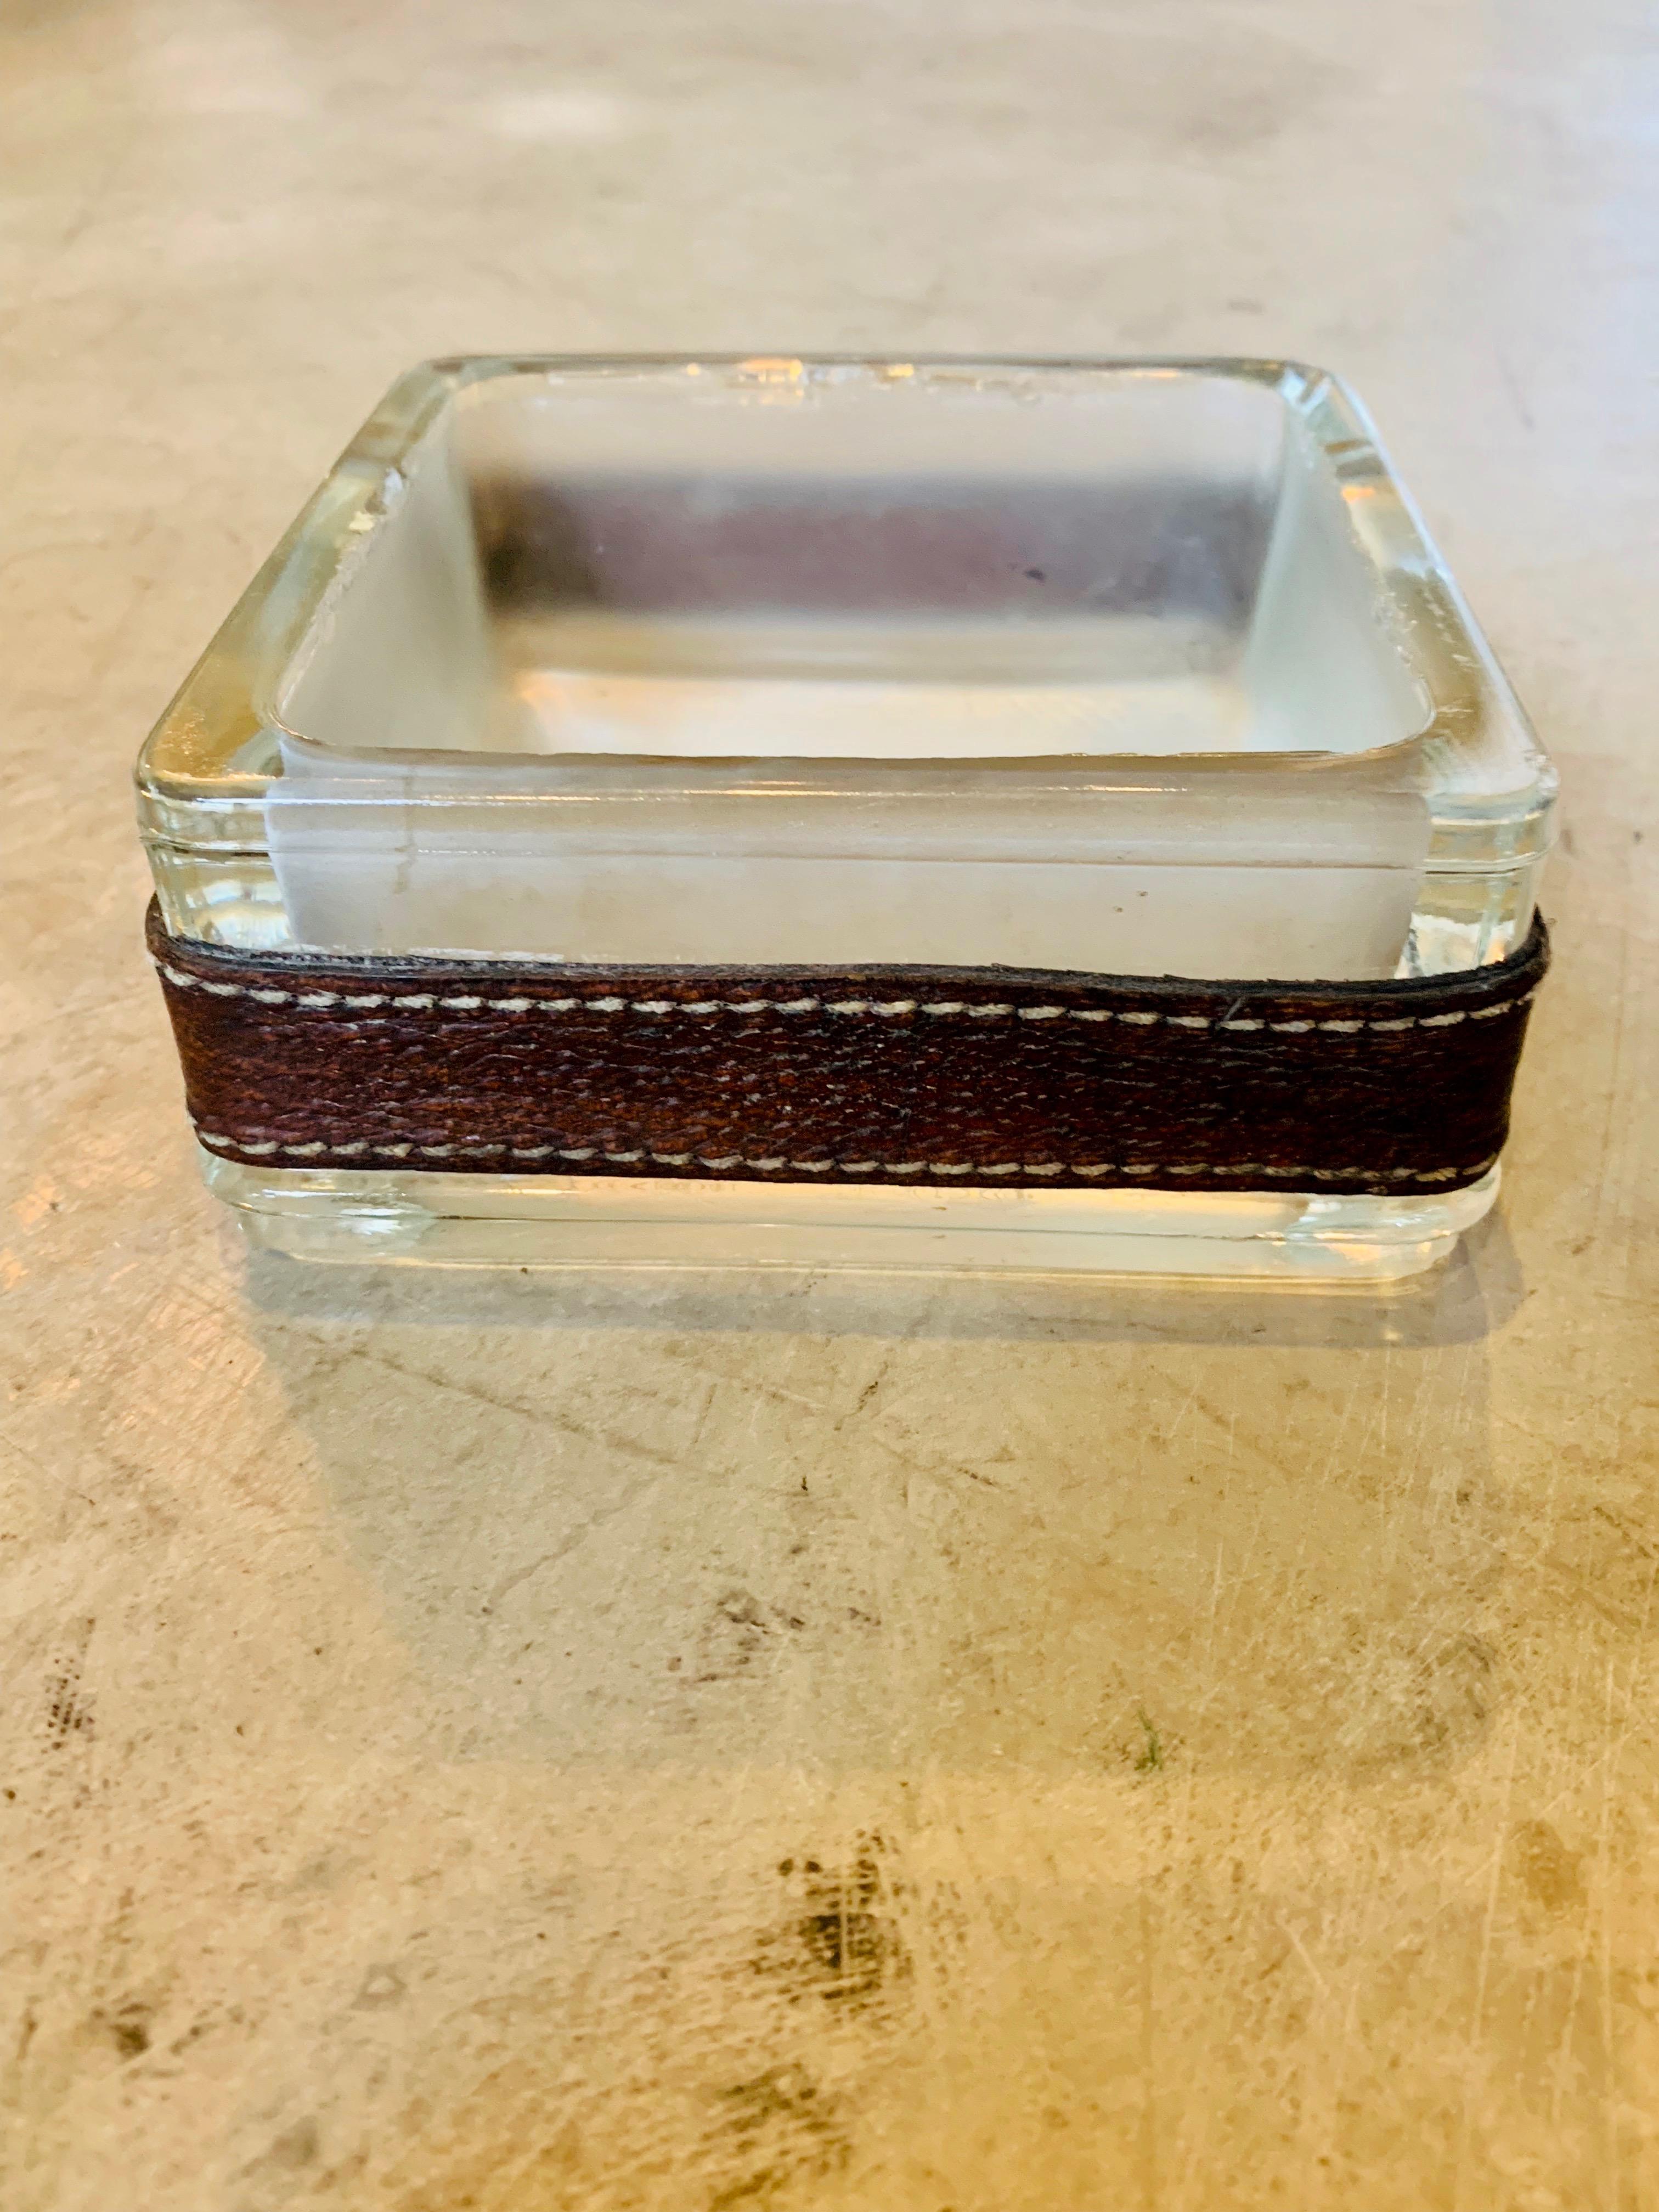 Handsome saddle leather and glass catchall by Jacques Adnet. Perfect for keys. Great for the home or office. Great vintage condition.